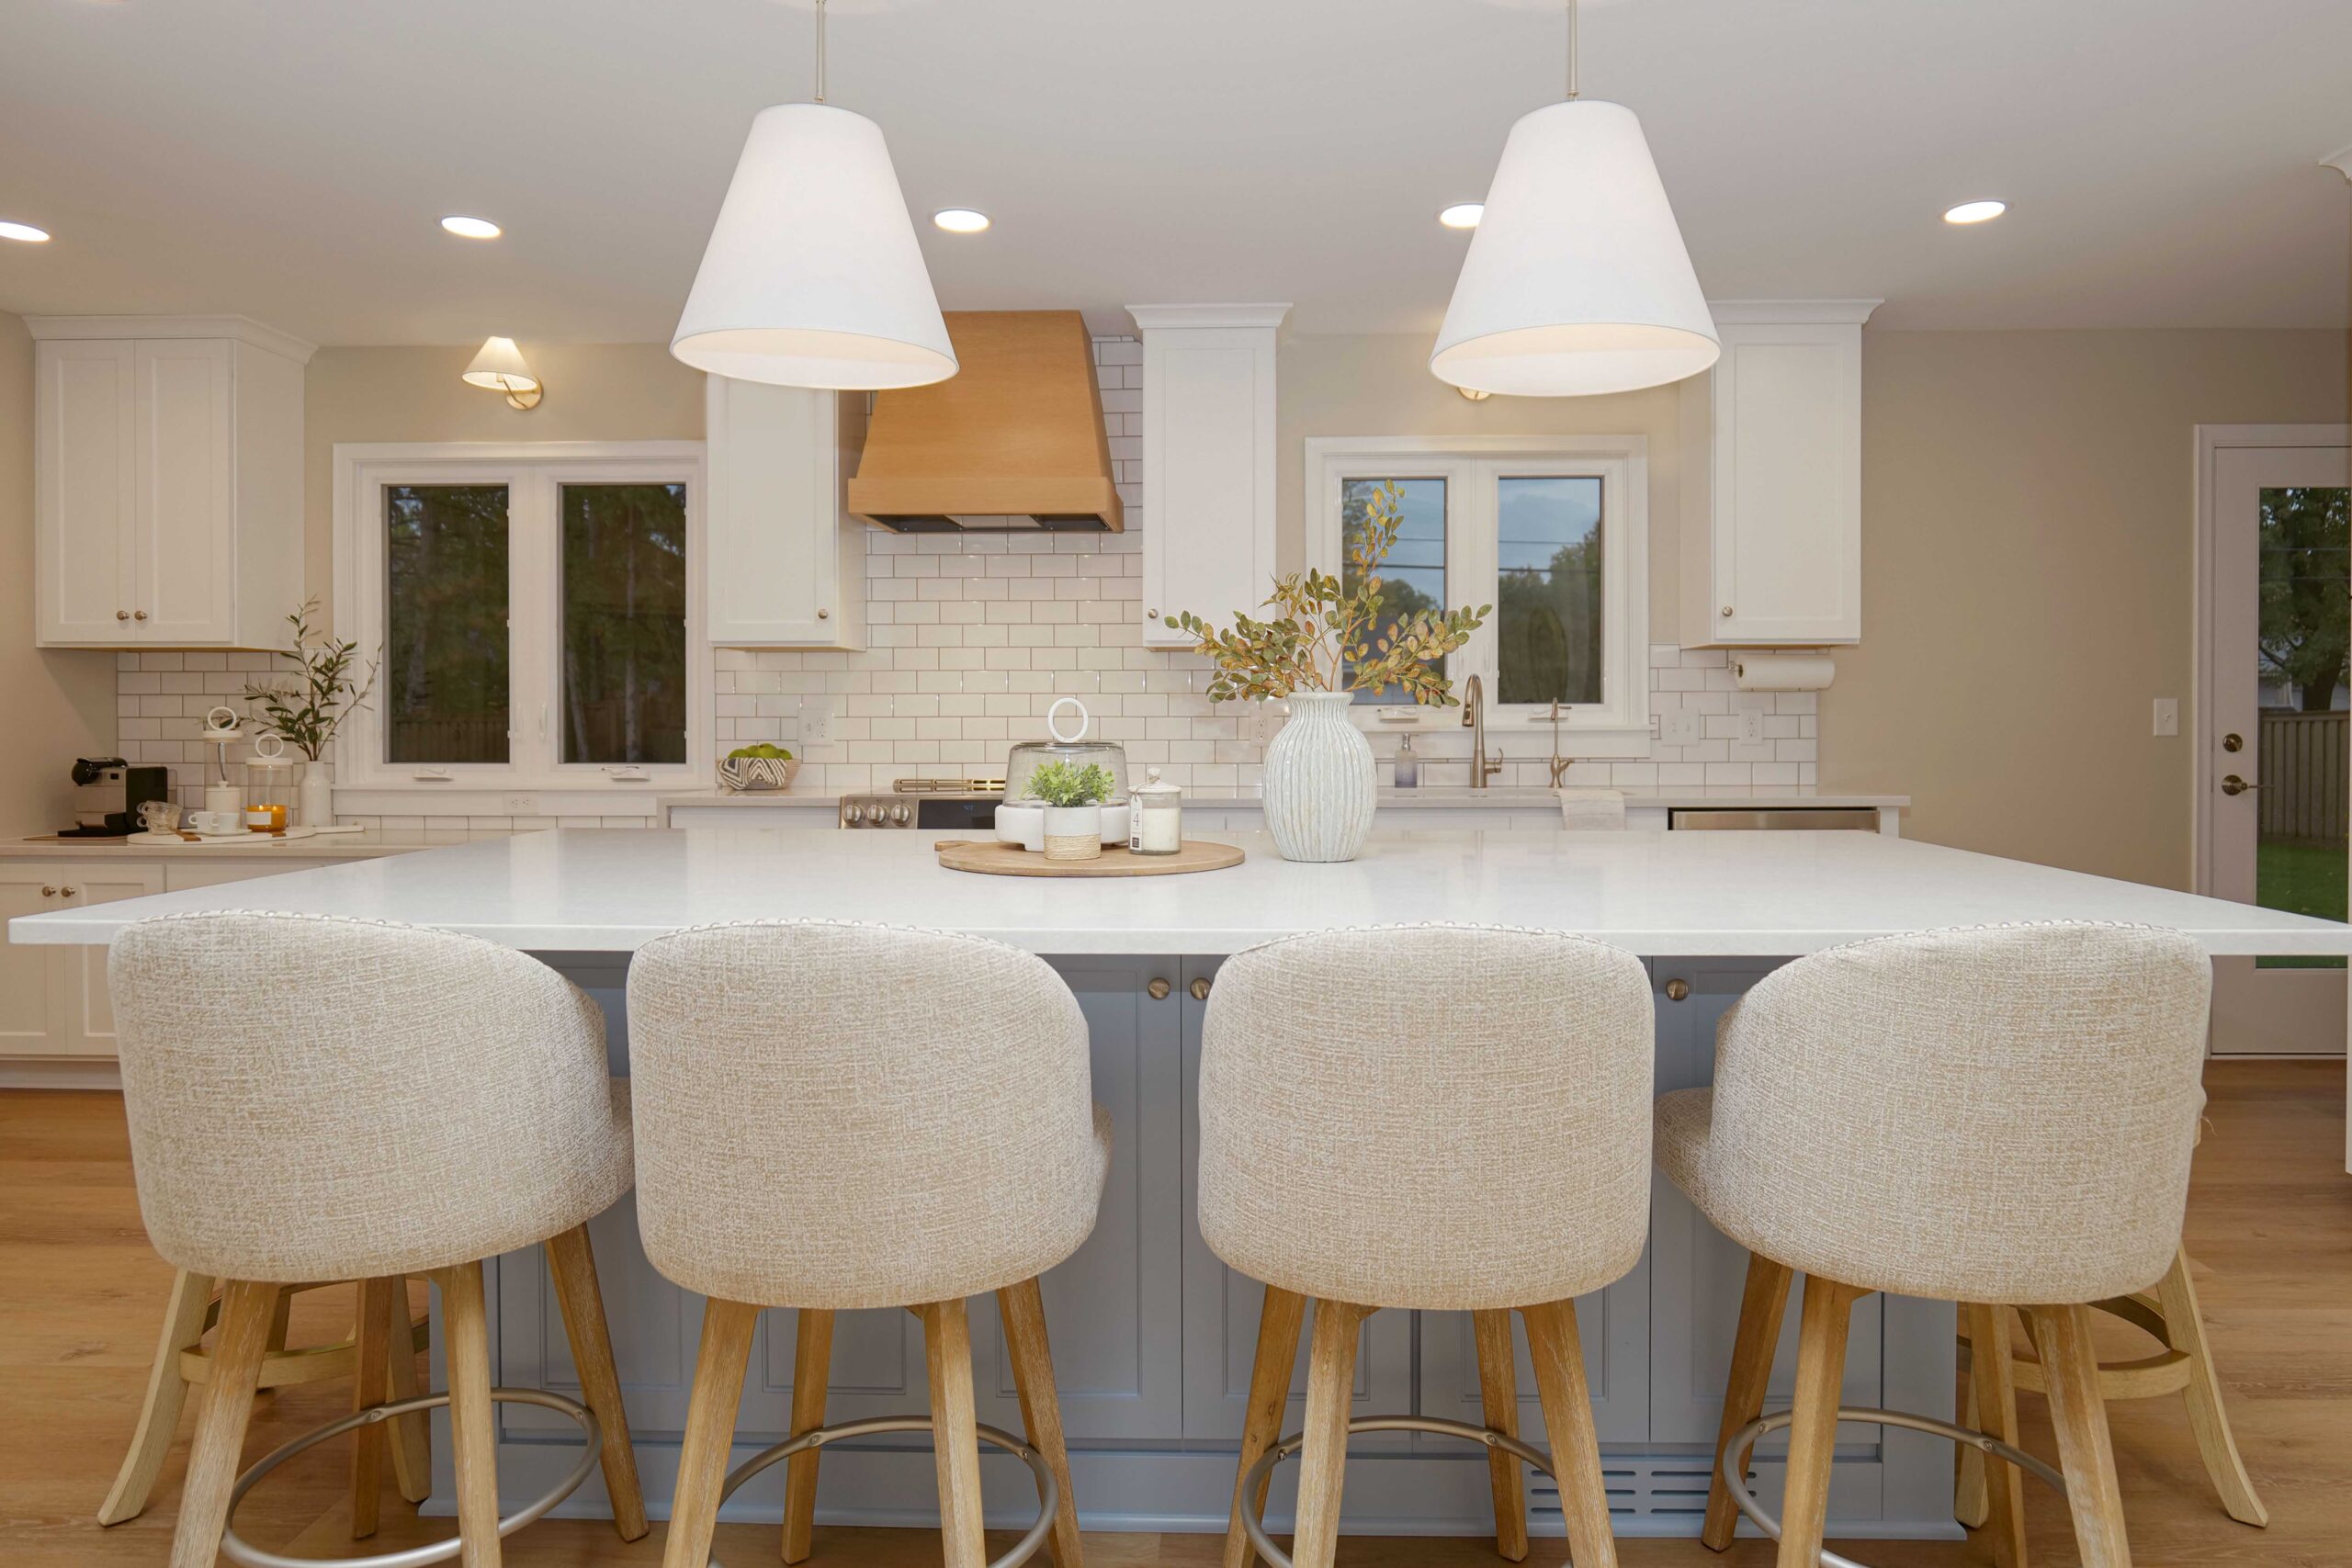 A coastal style kitchen remodel with a center island and bar stools.